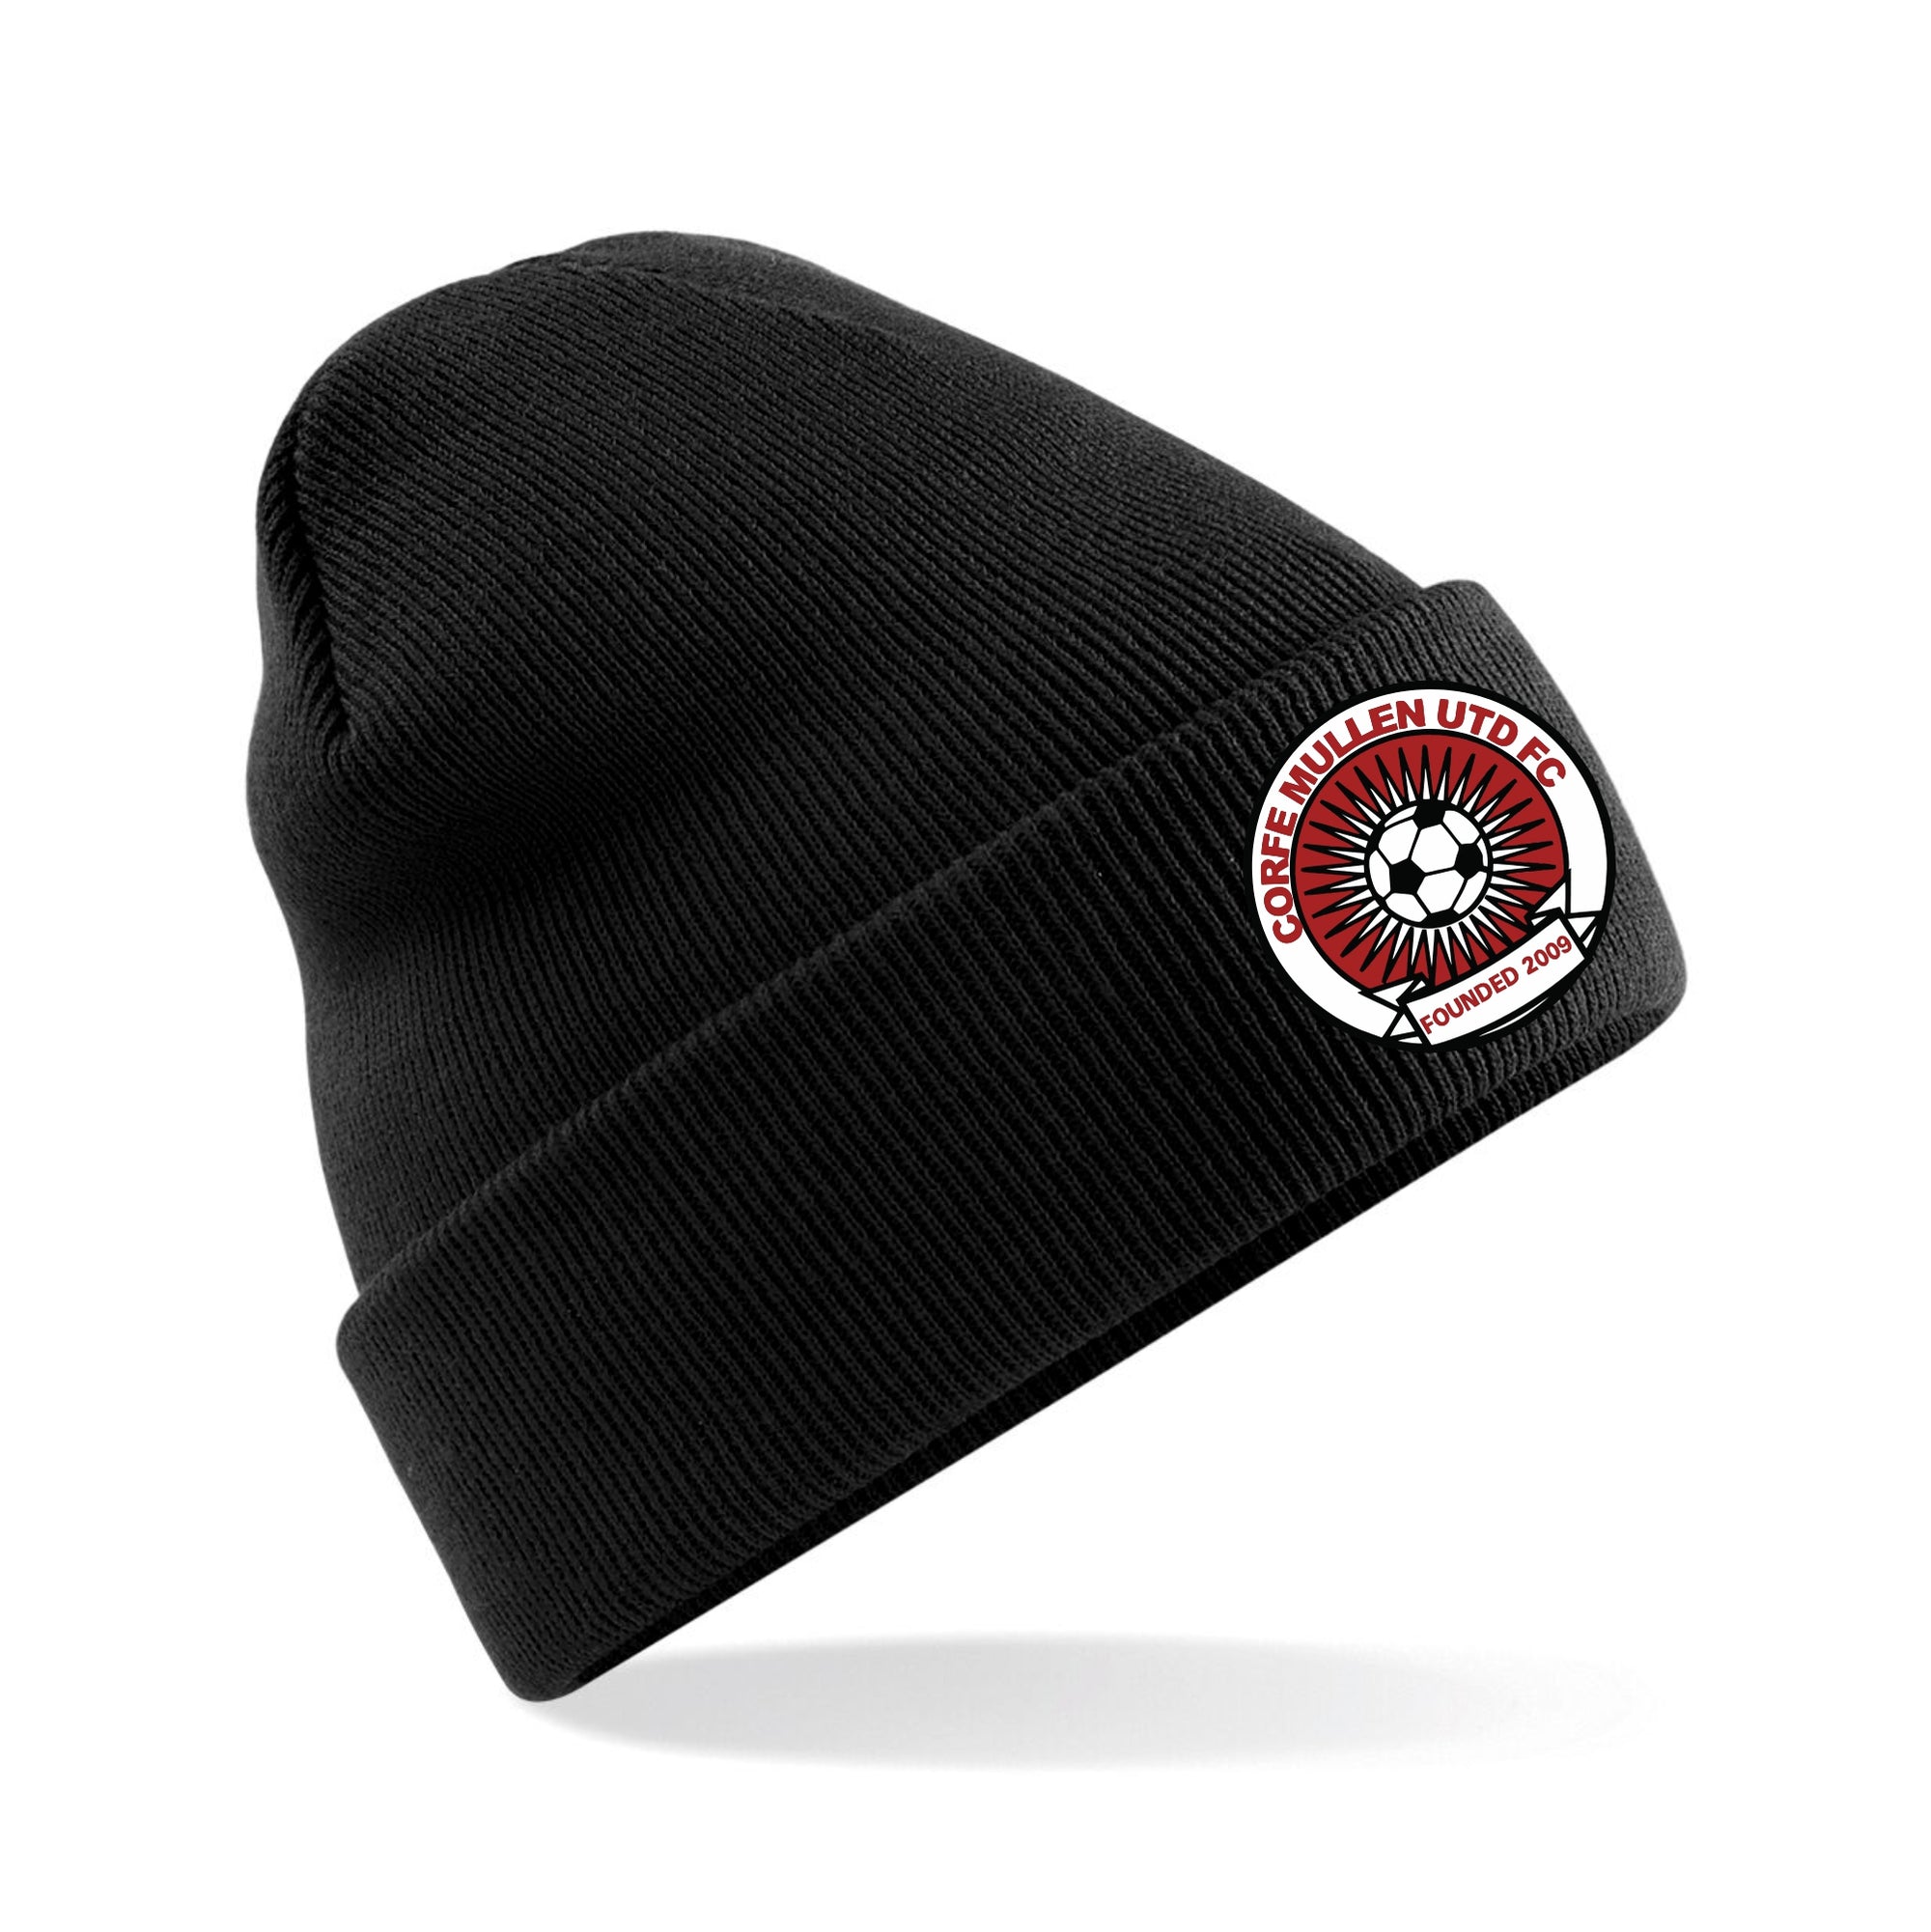 Corfe Mullen United Beanie with embroidered club badge